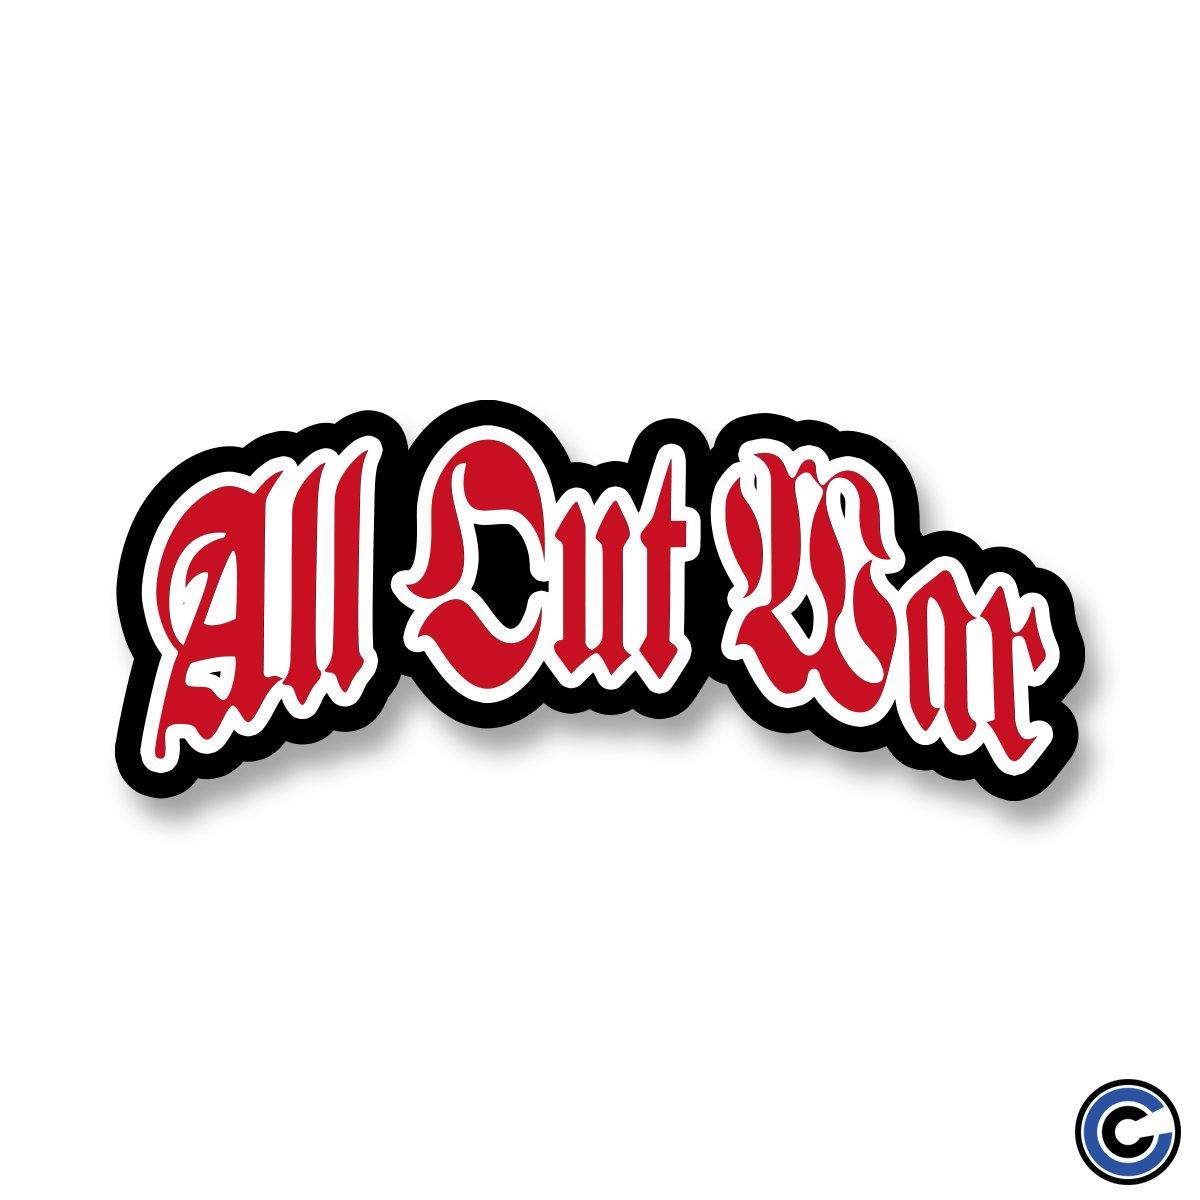 Buy – All Out War "Crucified Og" Sticker – Band & Music Merch – Cold Cuts Merch